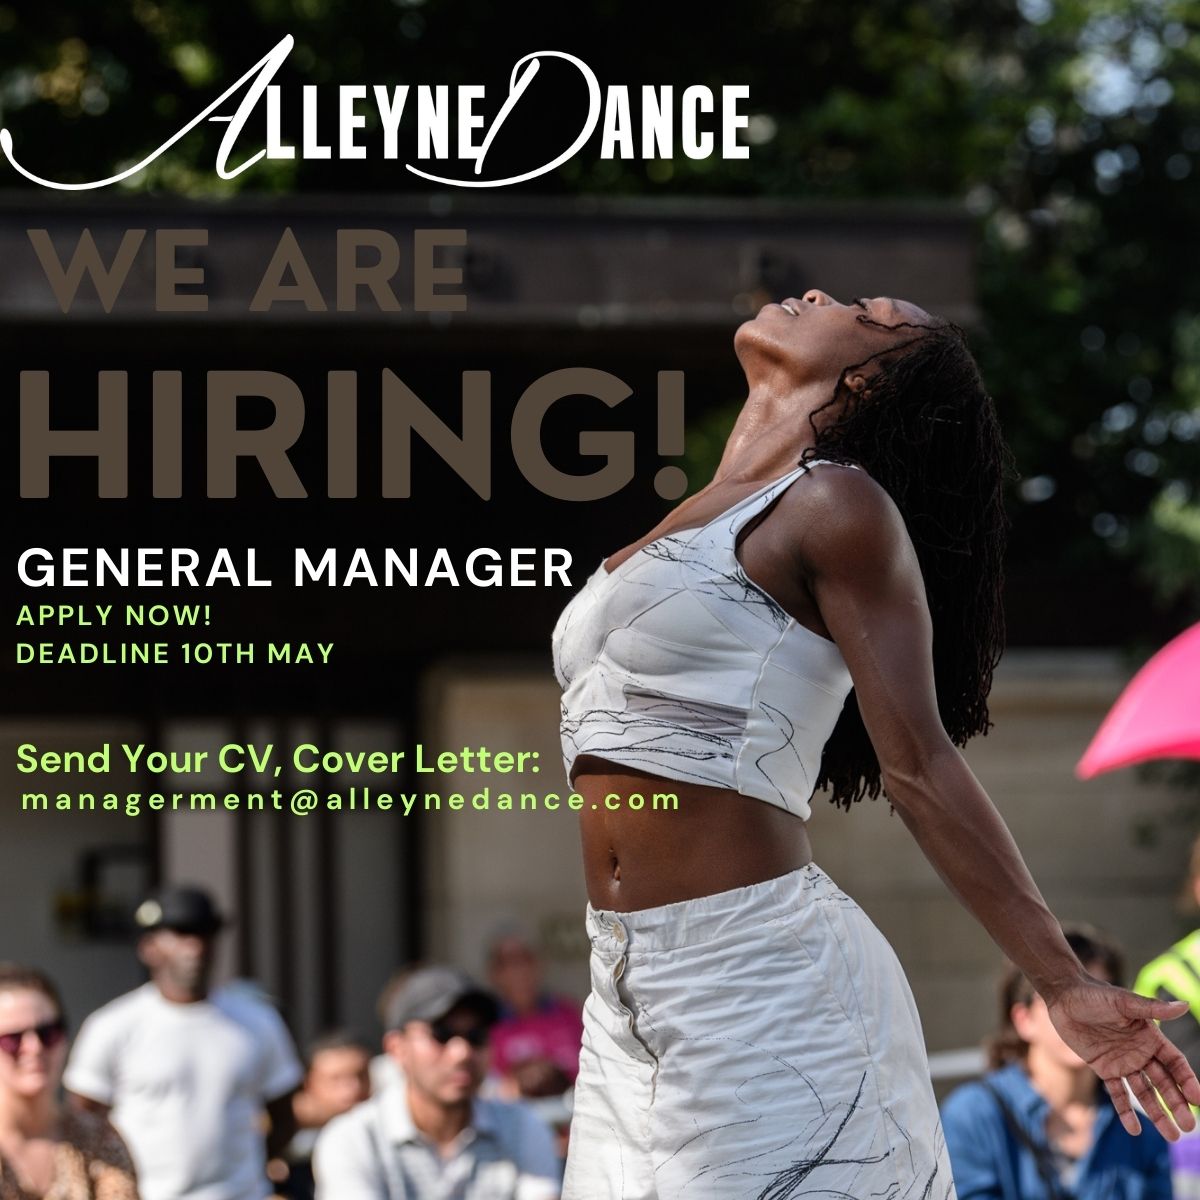 WE ARE HIRING 🚨 GENERAL MANAGER For a full job description & details on how to apply, visit alleynedance.com & head to the OPPORTUNITIES page #jobs #opportunities #AlleyneDance #hiring #Dance